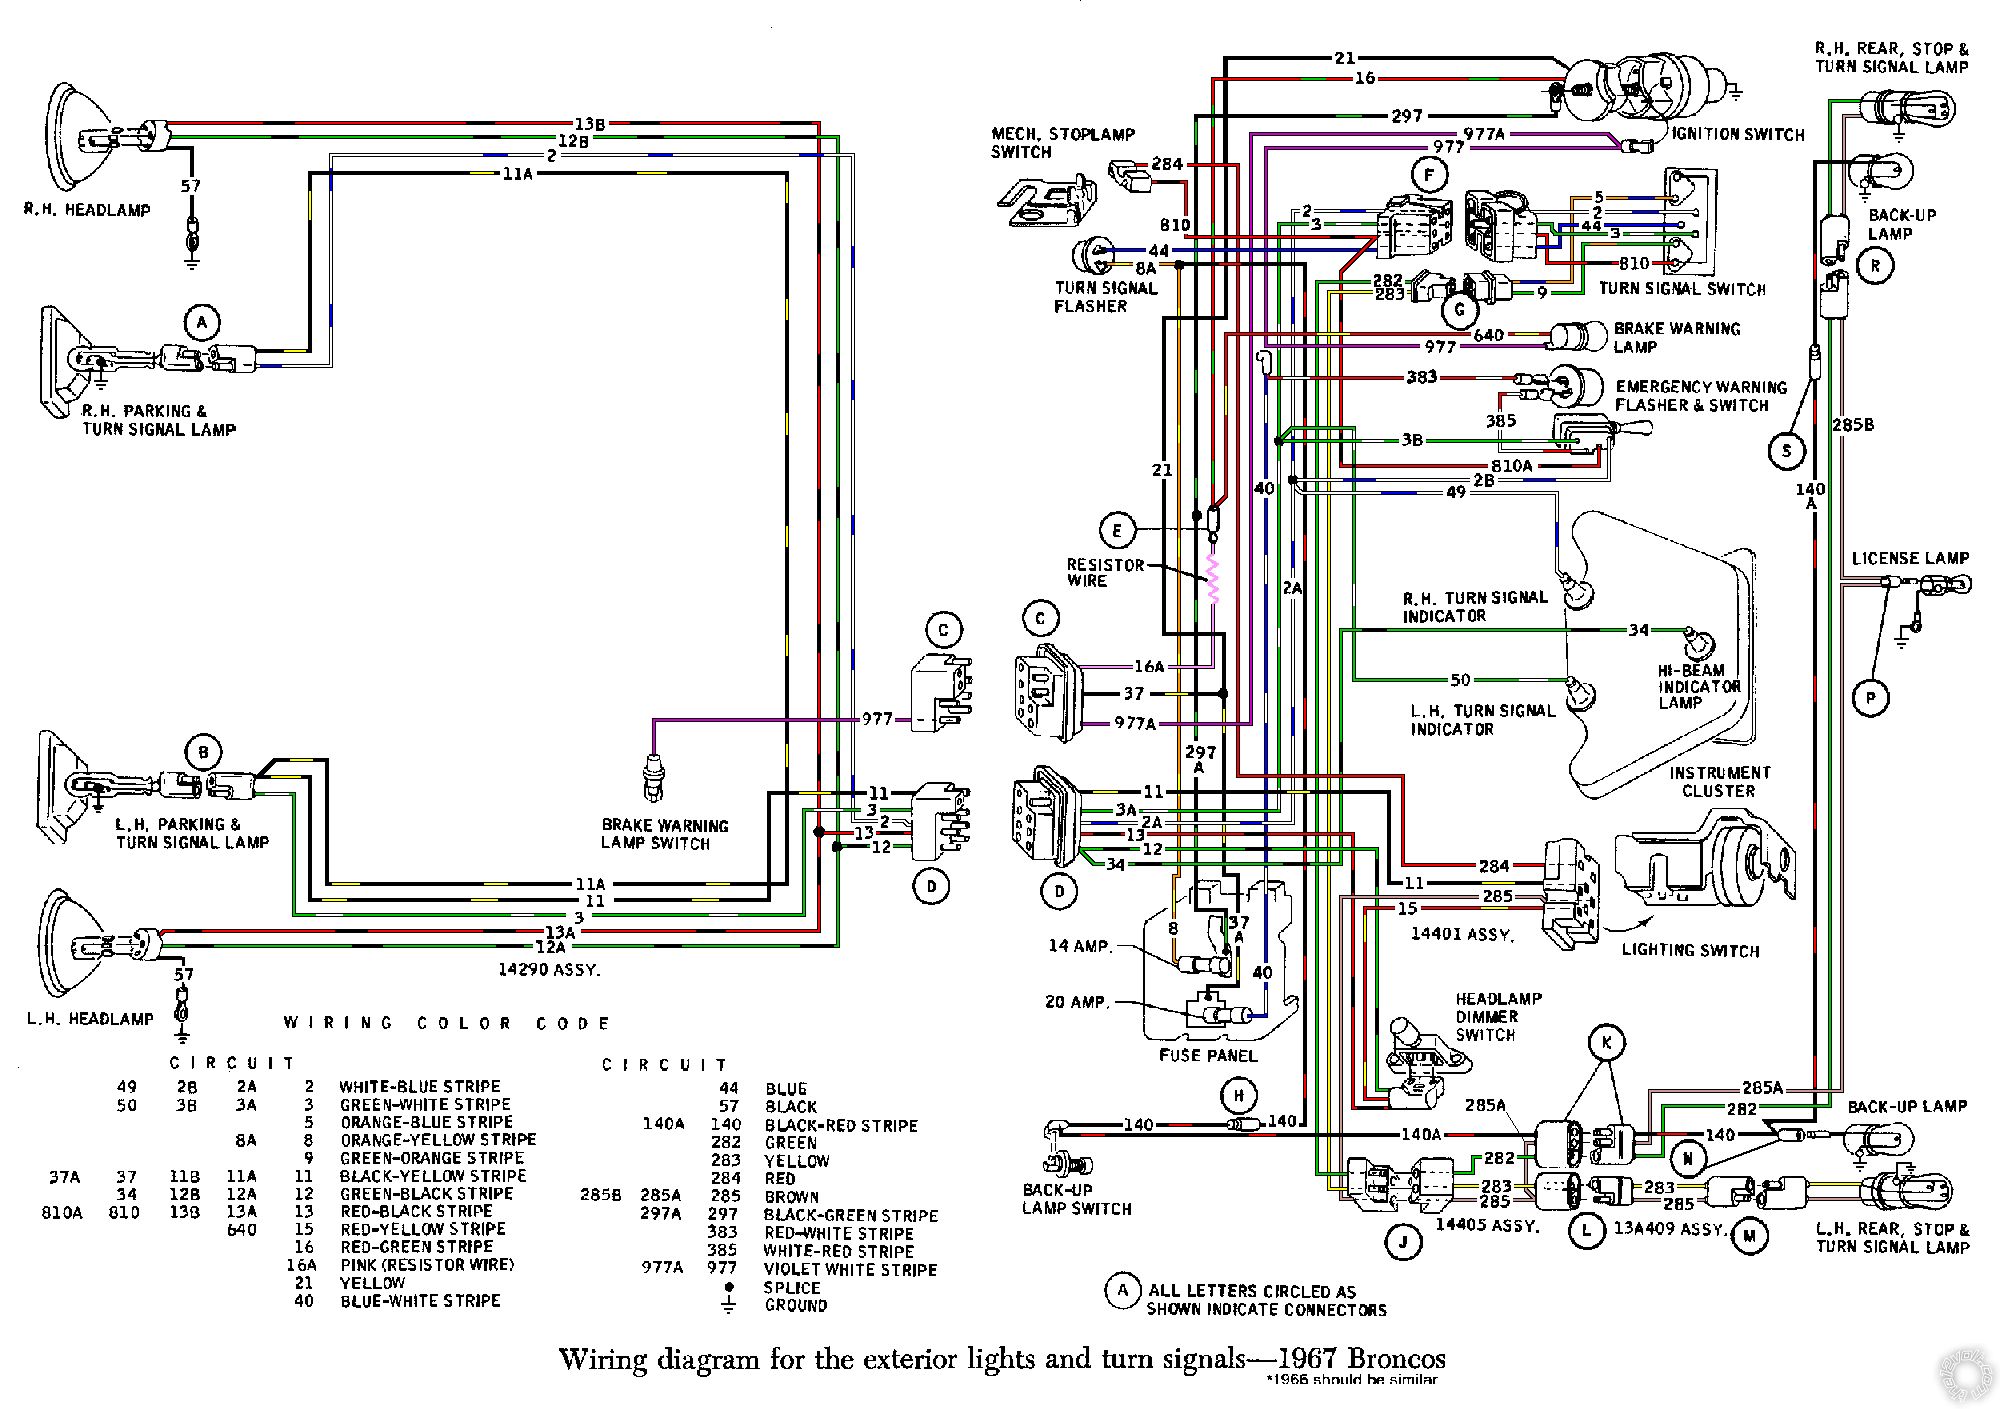 66 Ford F-250 Truck Wiring Diagram -- posted image.